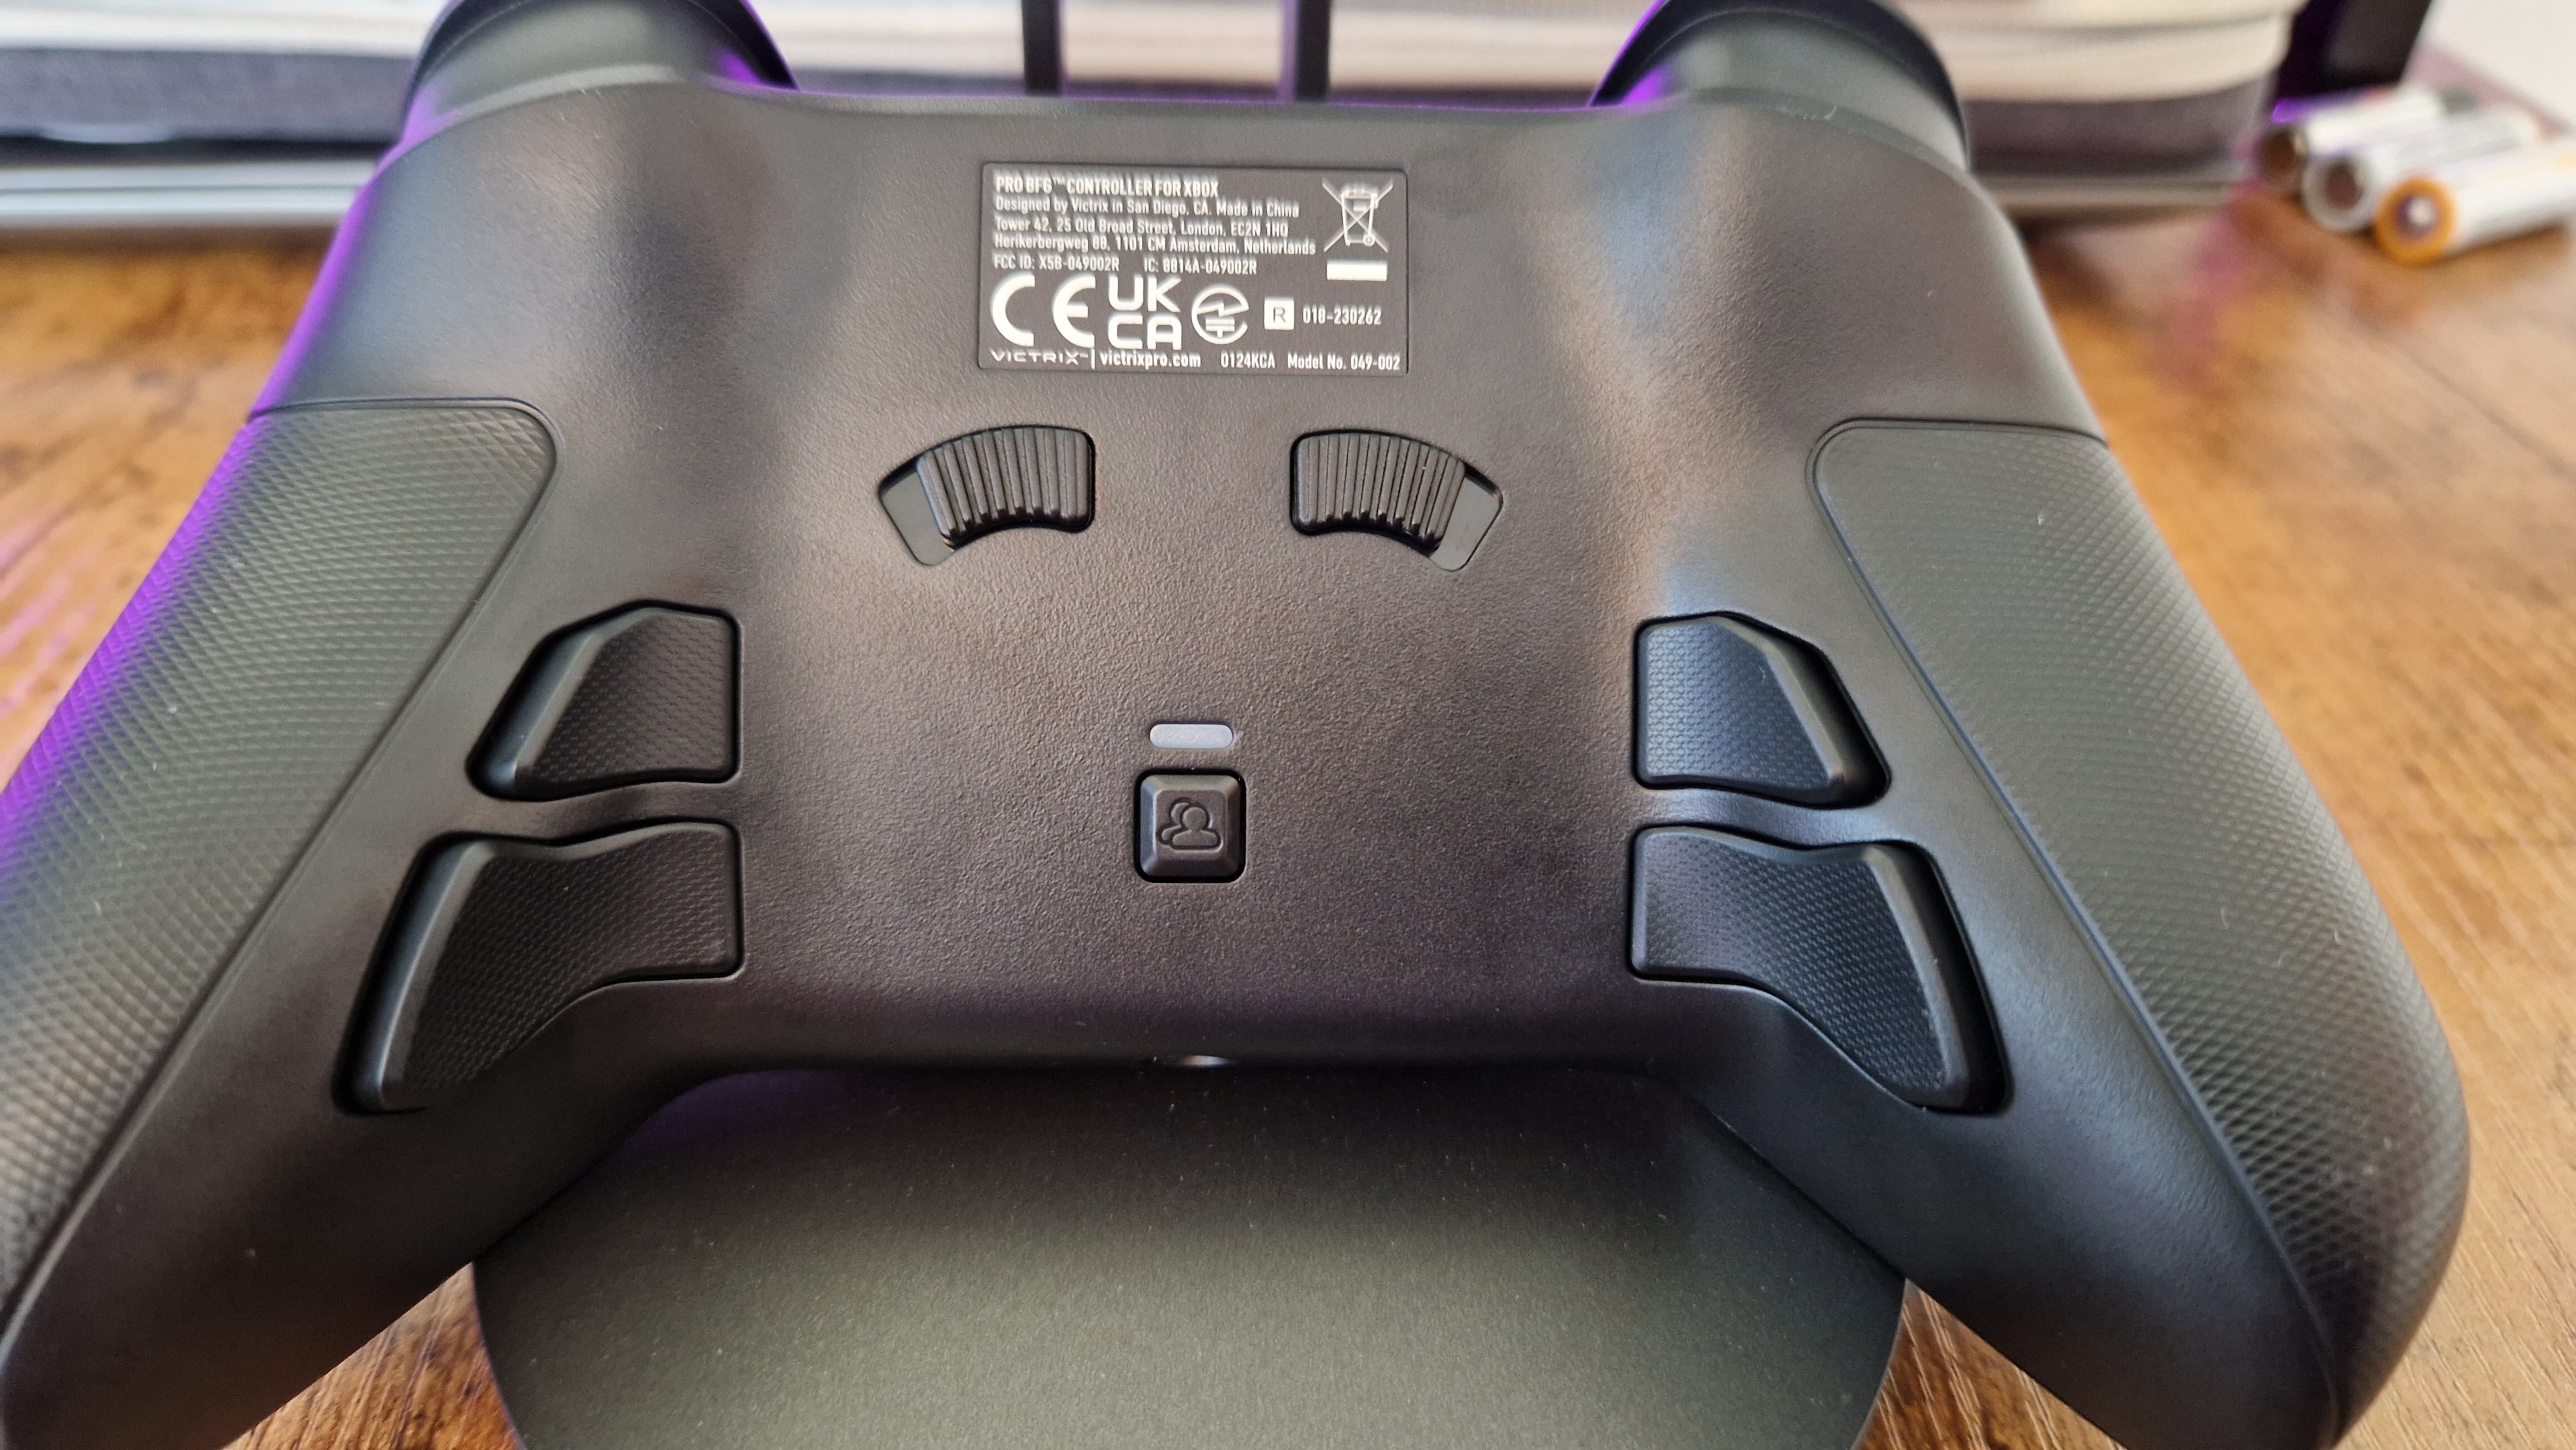 Victrix Pro BFG for Xbox from behind, showing its back buttons and other function buttons